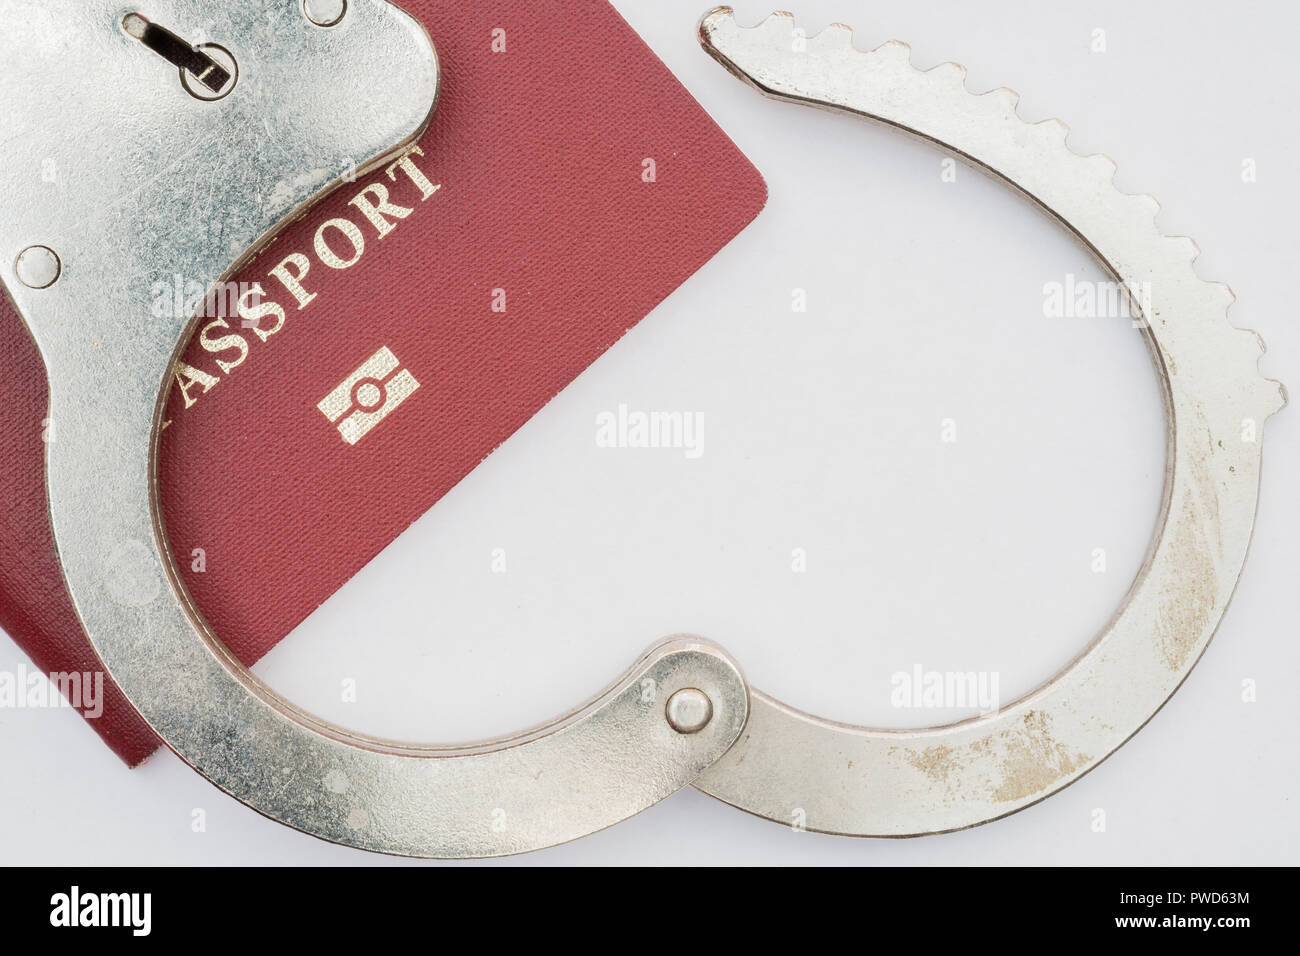 red passport on white background and handcuffs Stock Photo